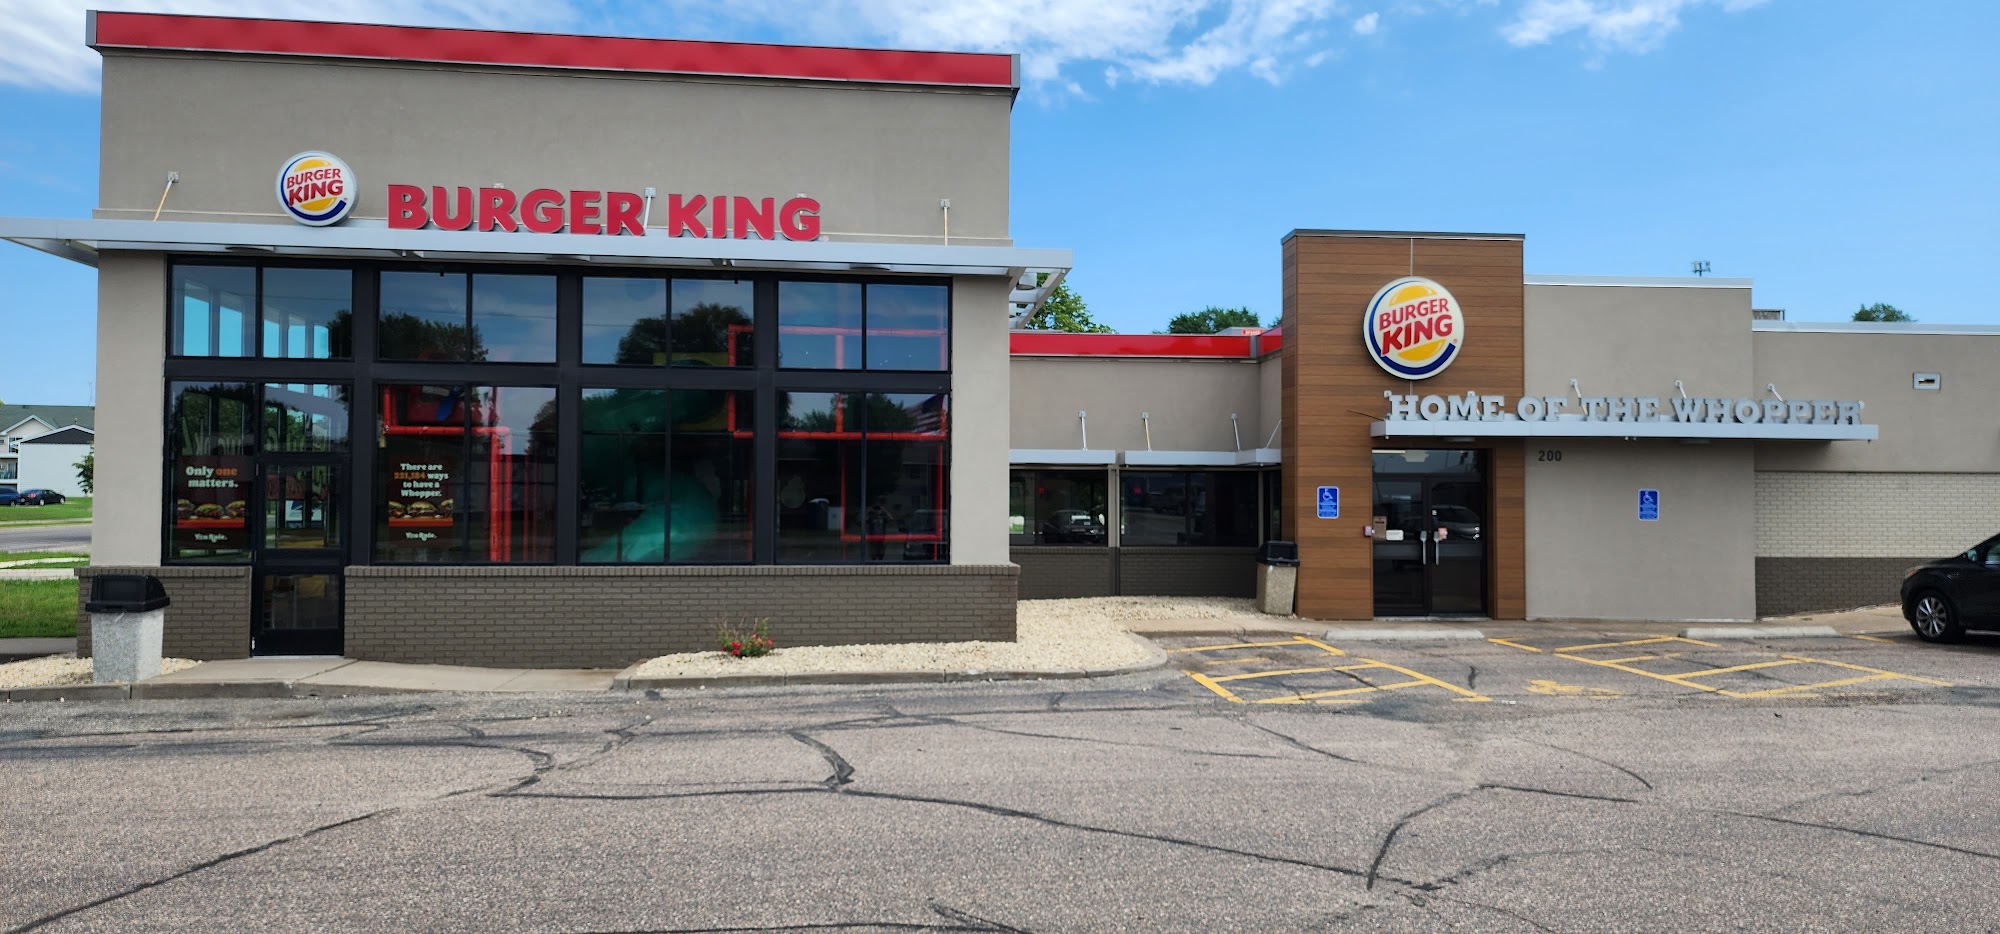 Burger King 200 Lauring Lane, Monticello, MN 55362